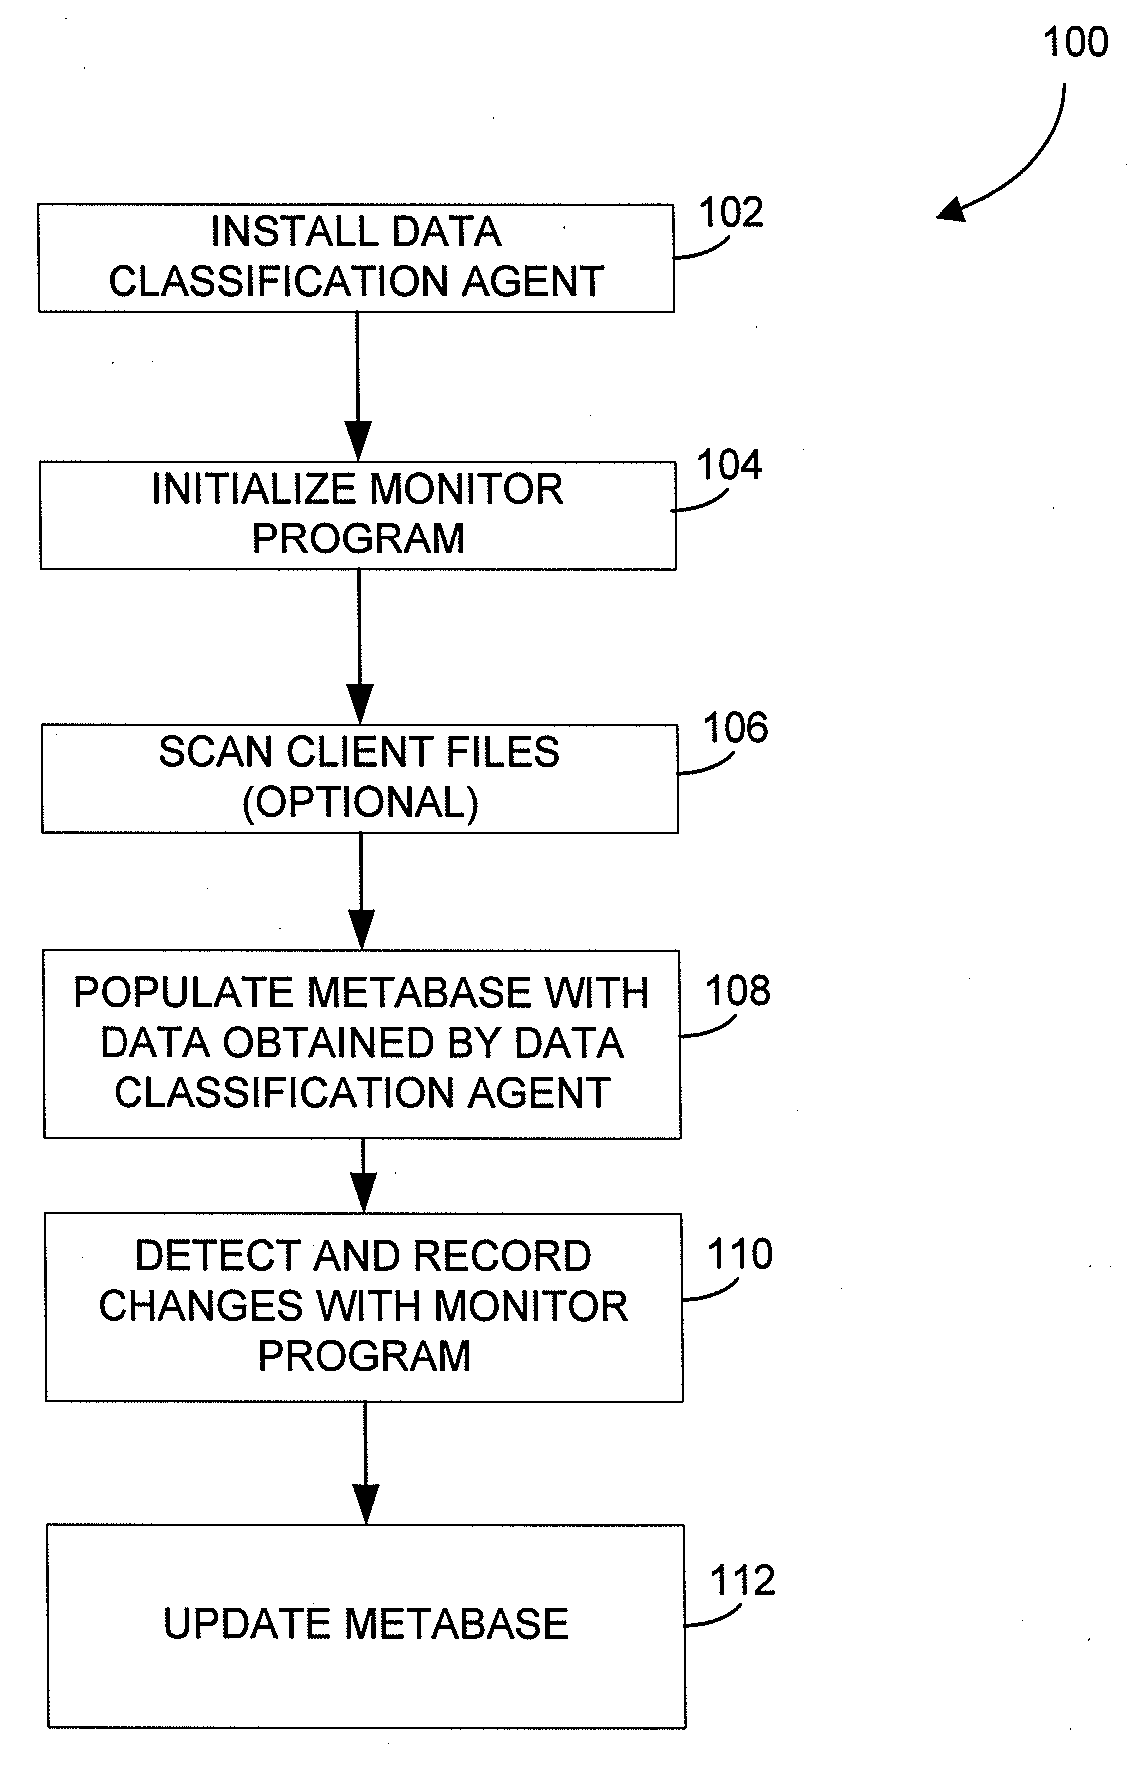 Metabase for facilitating data classification